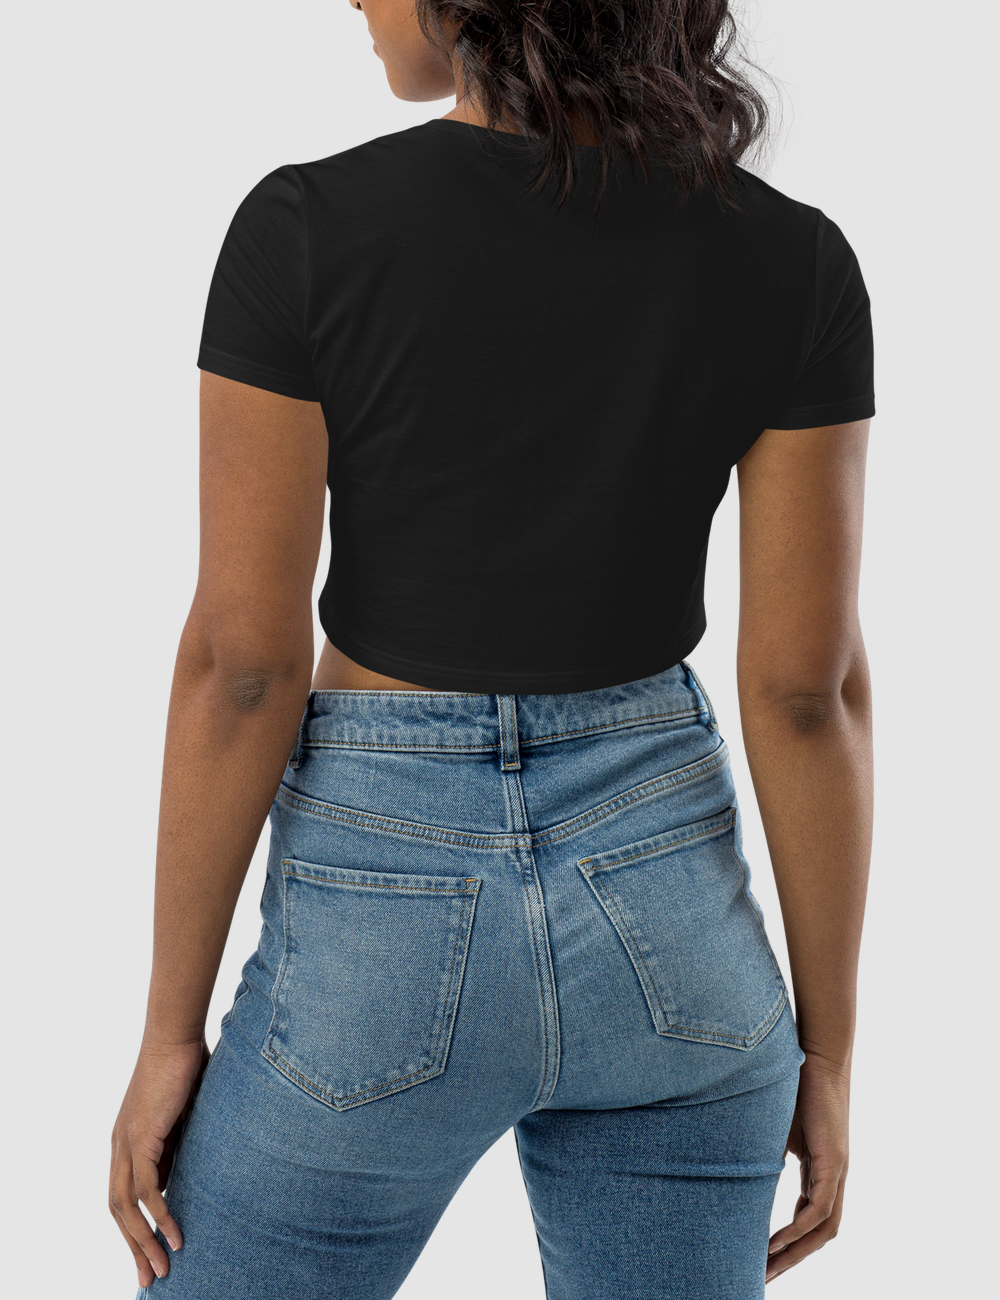 Sorry I'm Late I Got Here As Soon As I Wanted To Women's Fitted Crop Top T-Shirt OniTakai